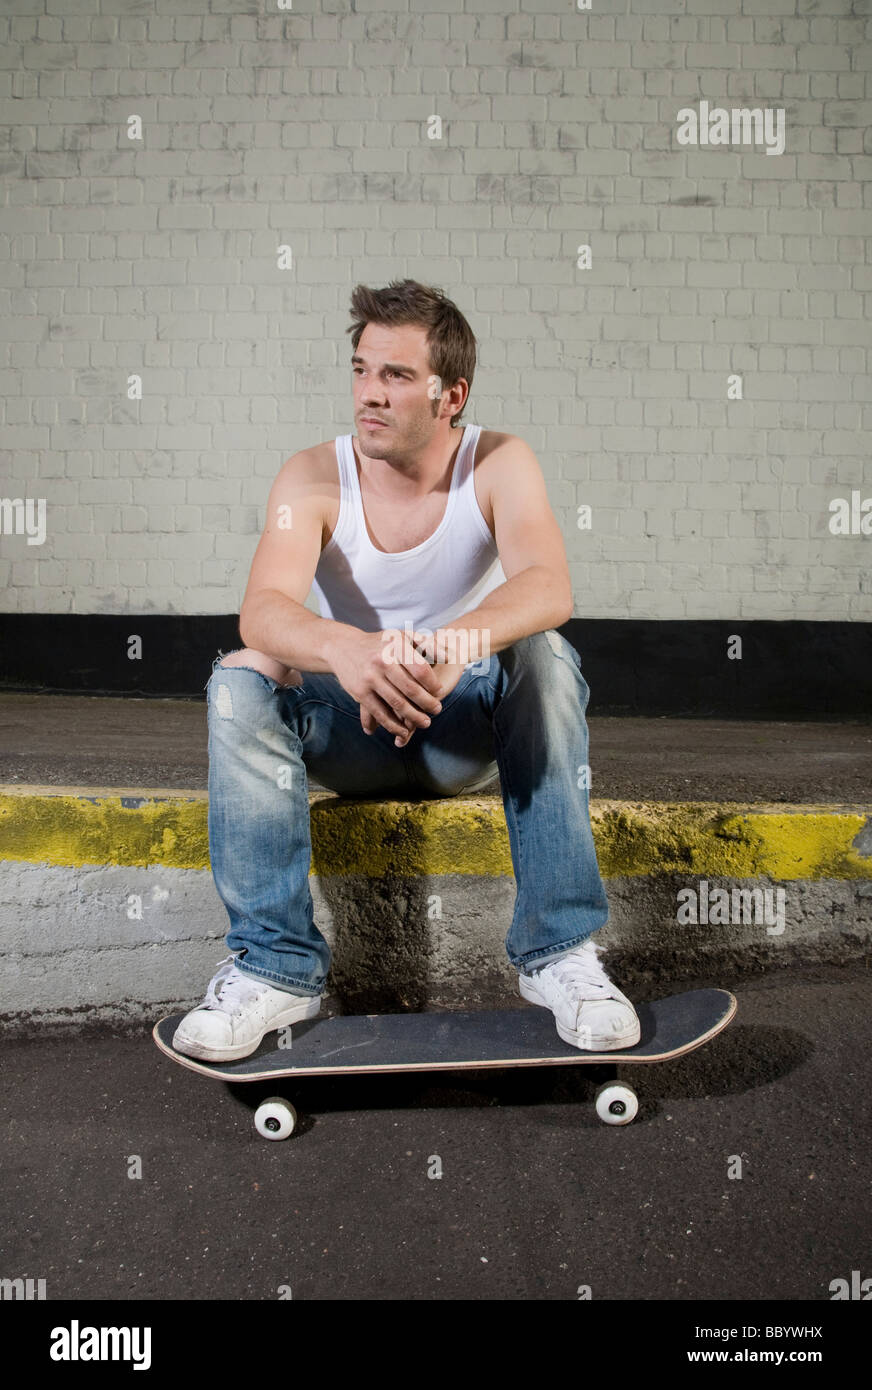 Skateboarder sitting on a loading ramp, relaxed Stock Photo